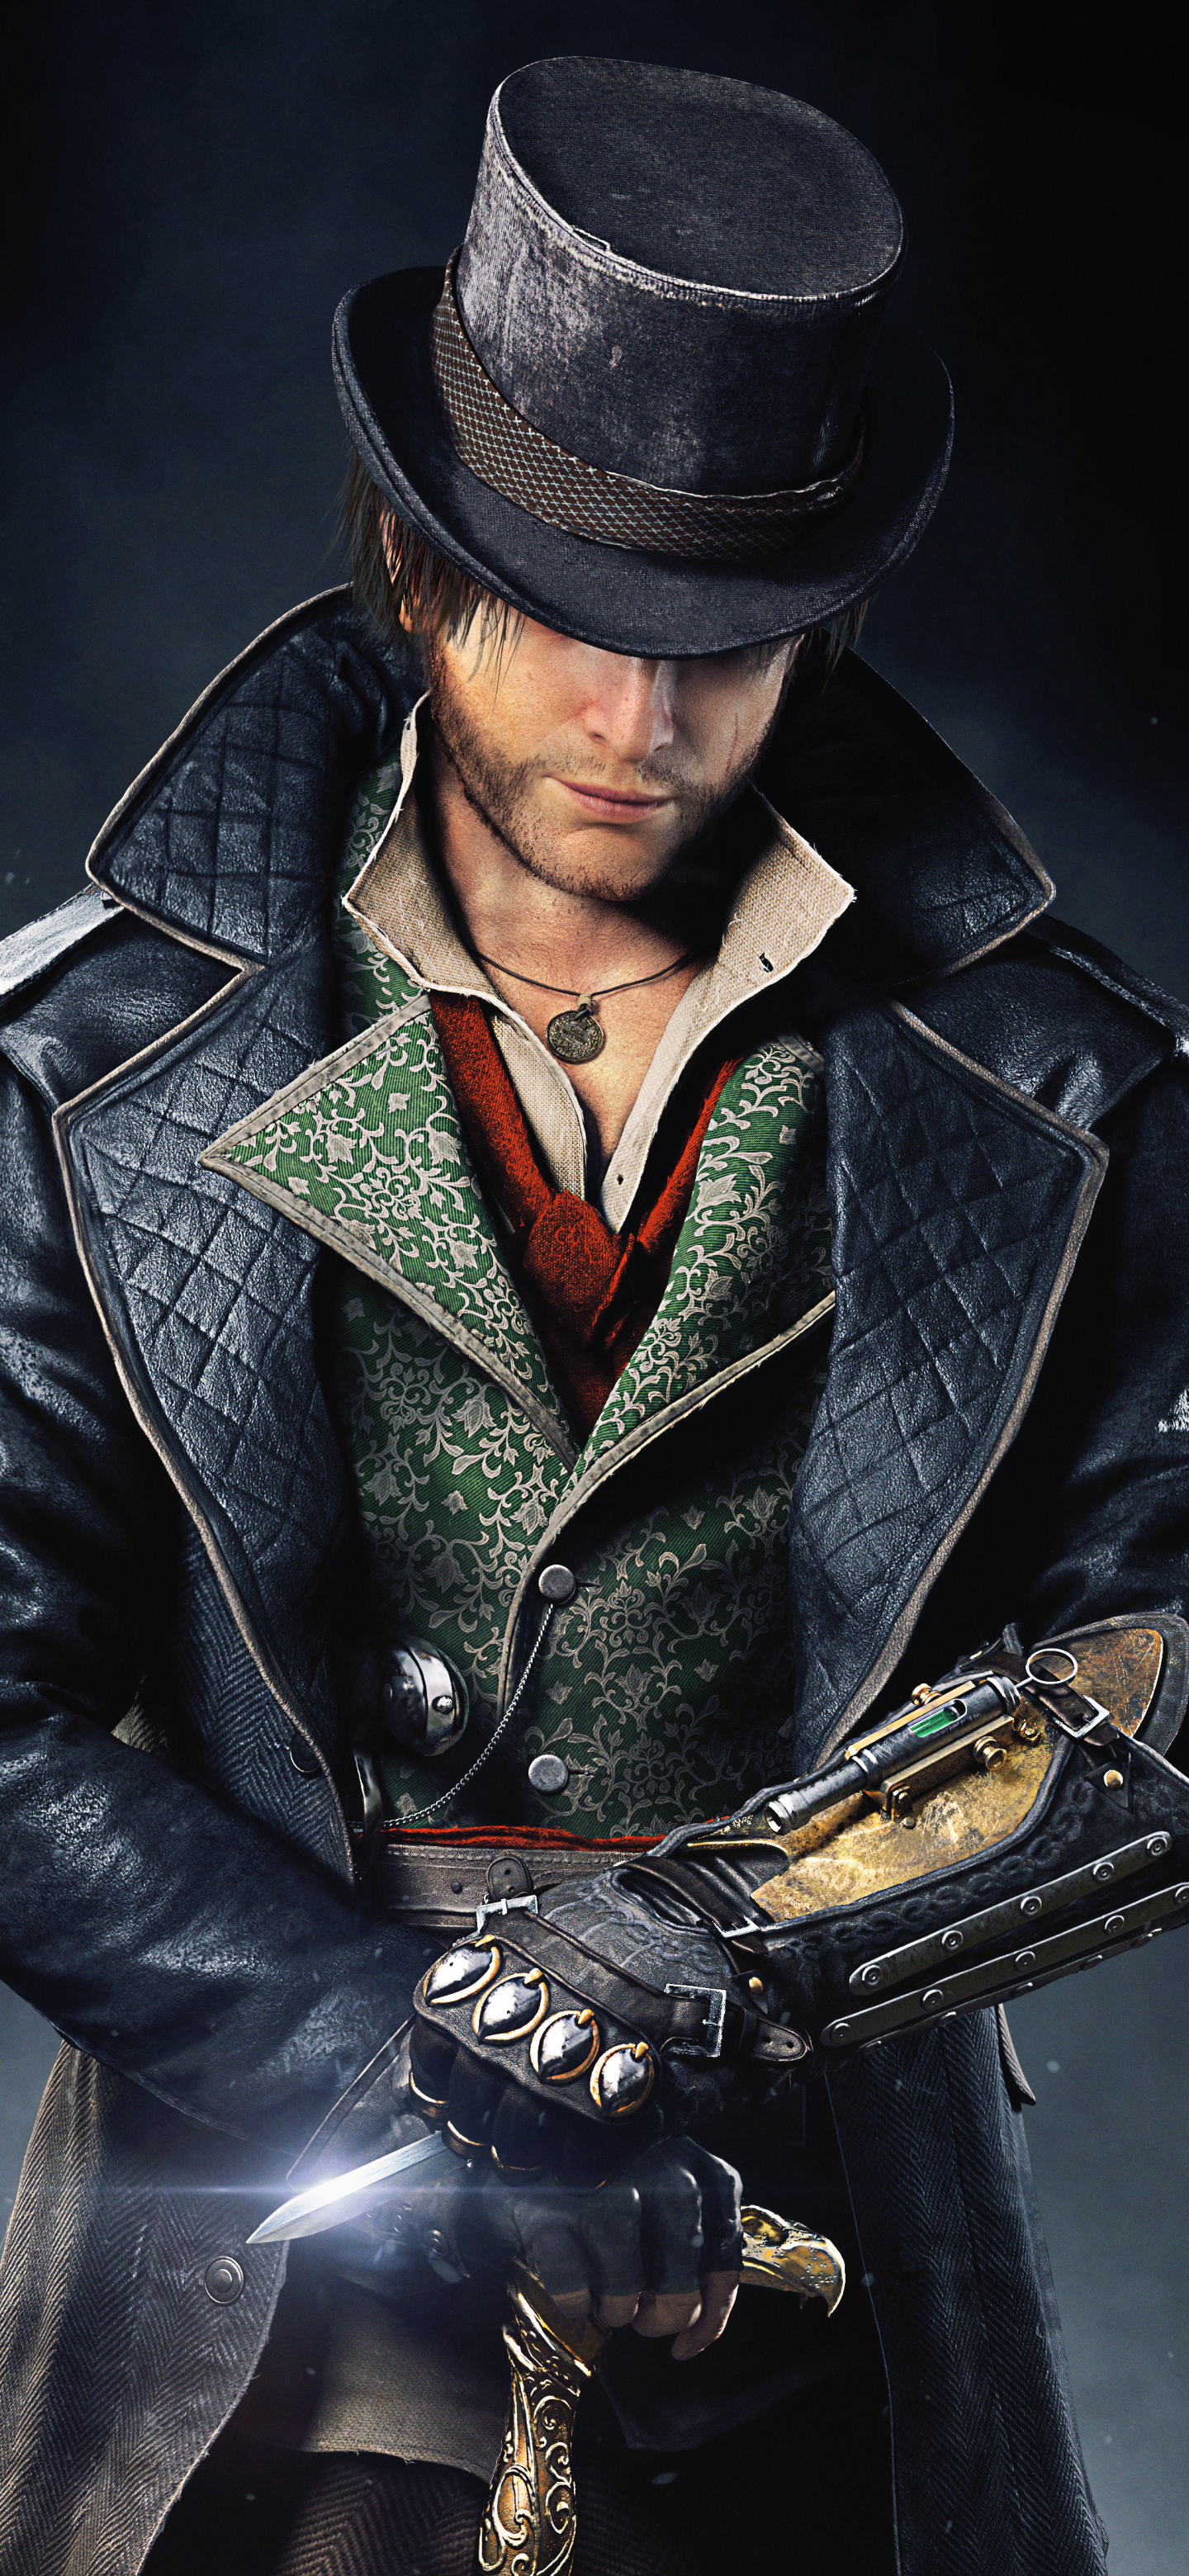 New Lock Screen Wallpapers video game, assassin's creed: syndicate, jacob frye, assassin's creed